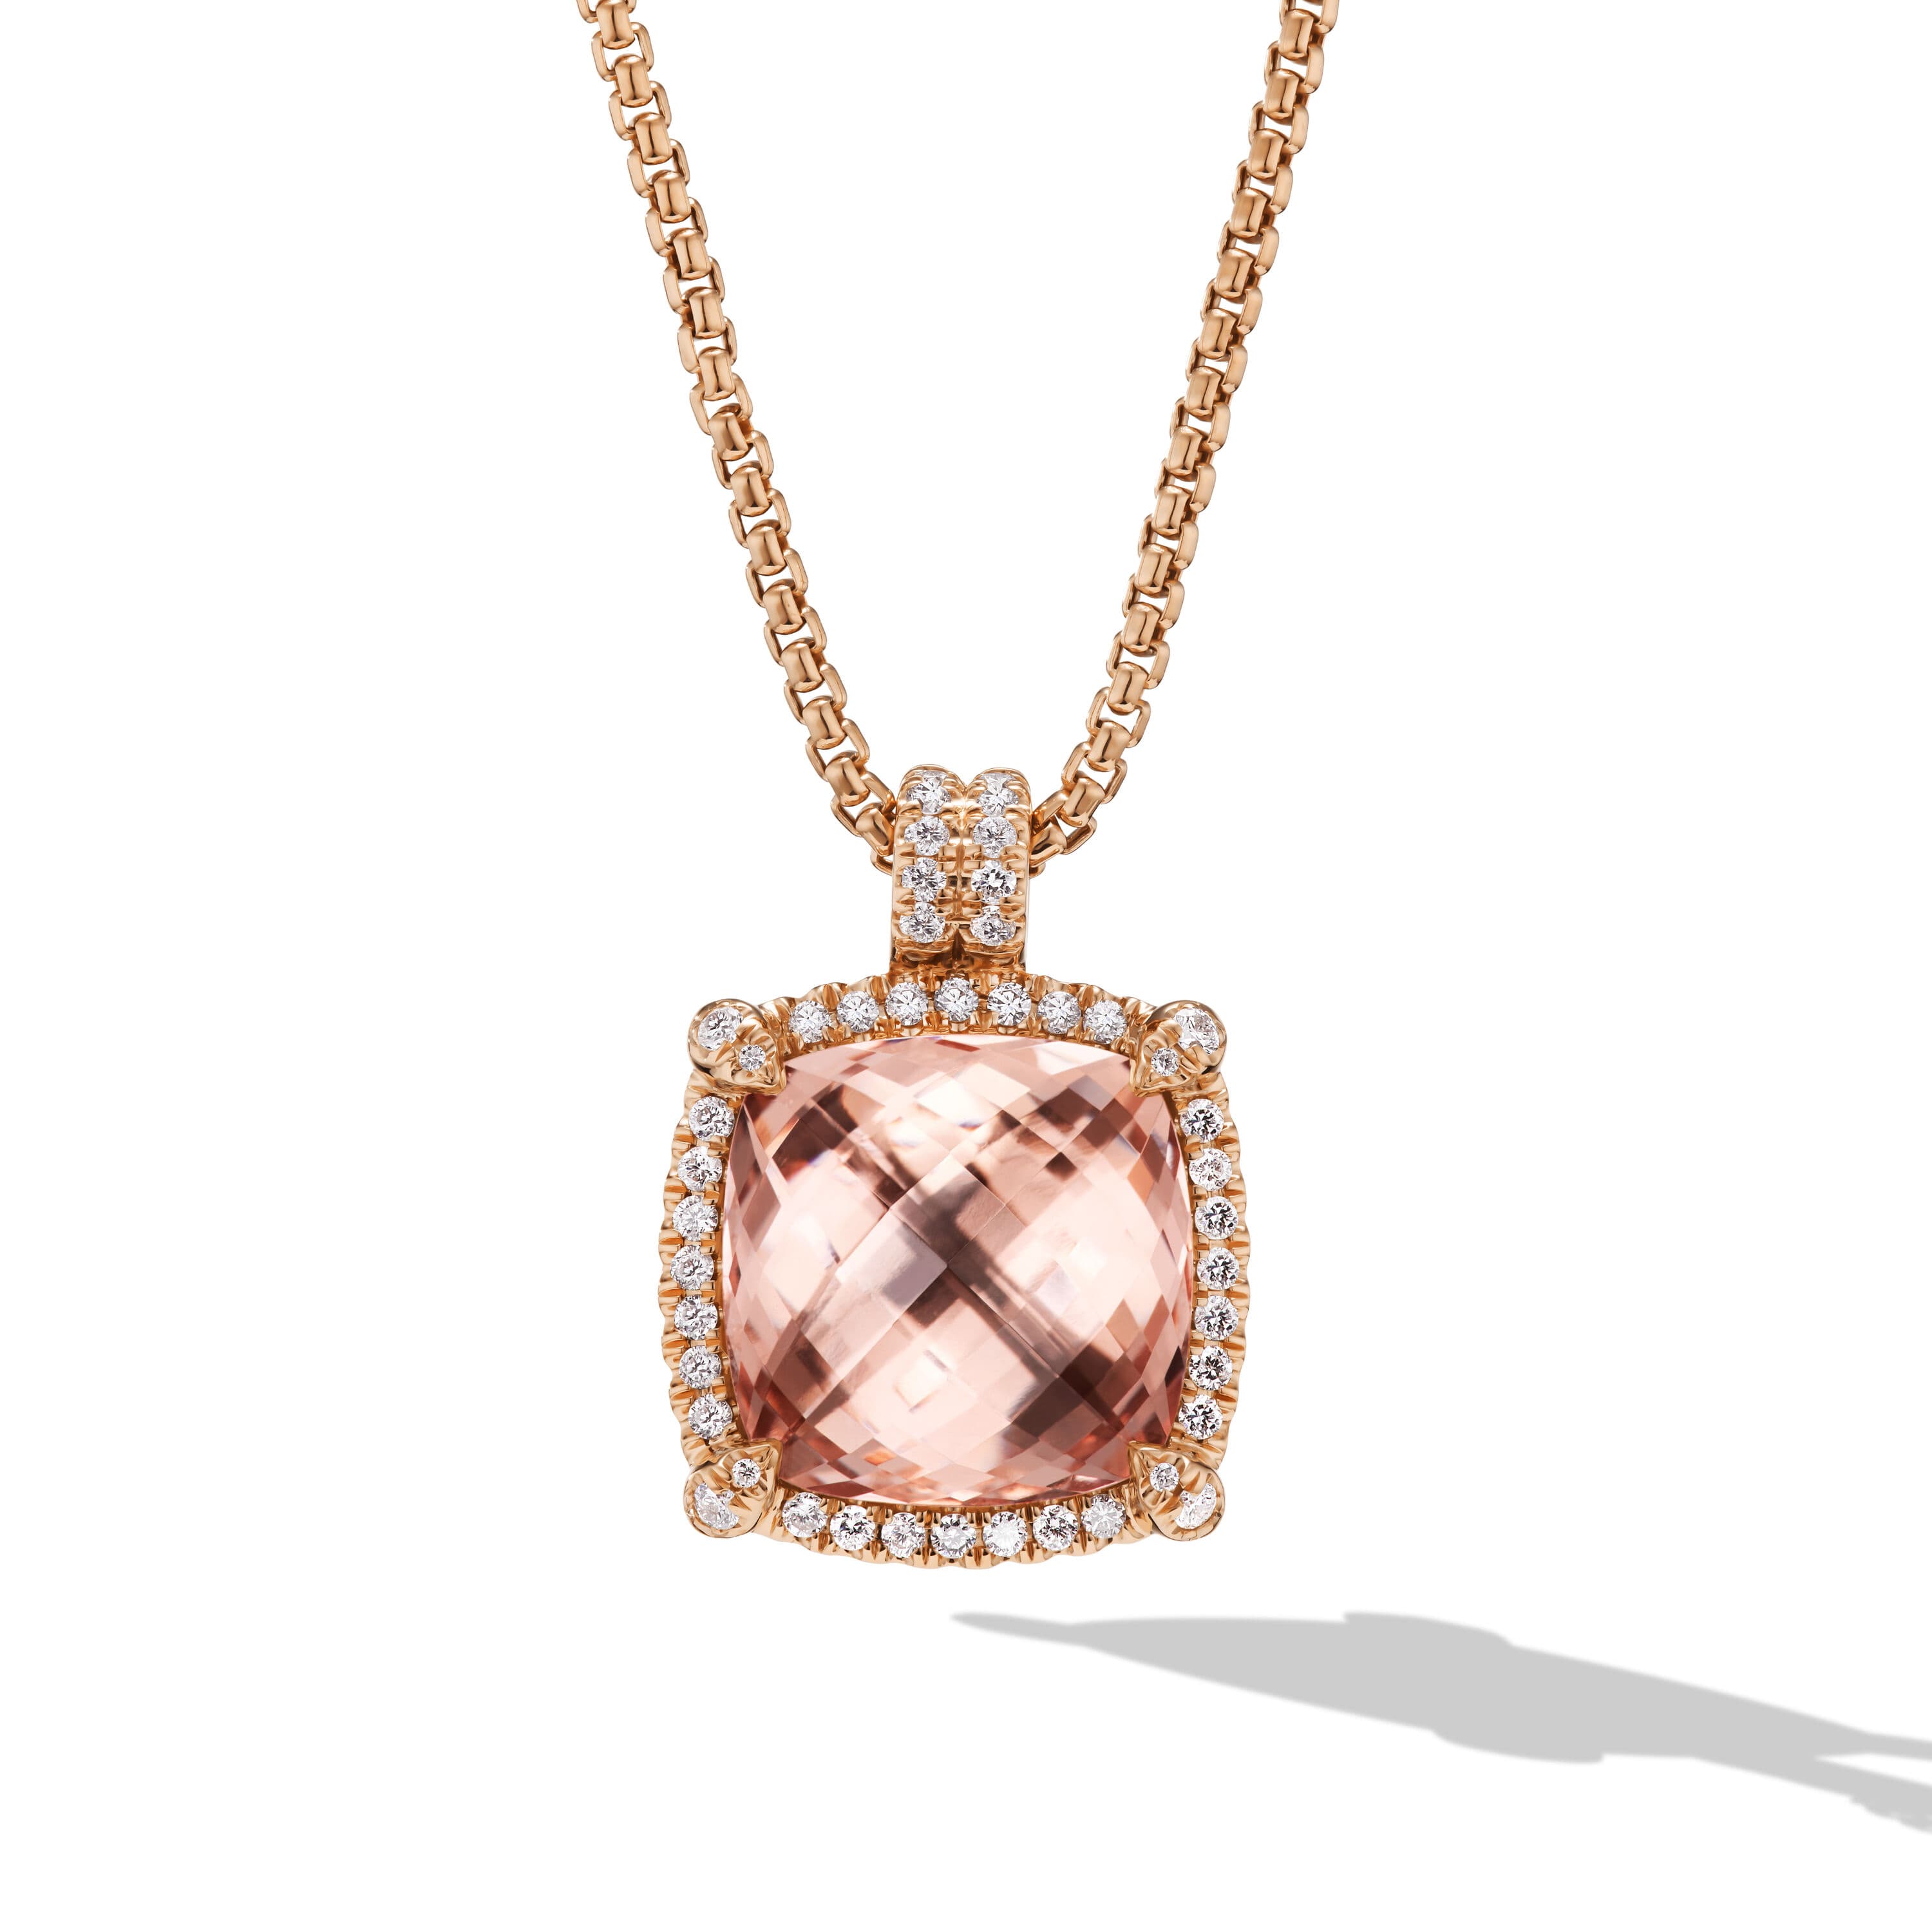 David Yurman Chatelaine Pave Bezel Pendant Necklace in Rose Gold with Morganite and Diamonds